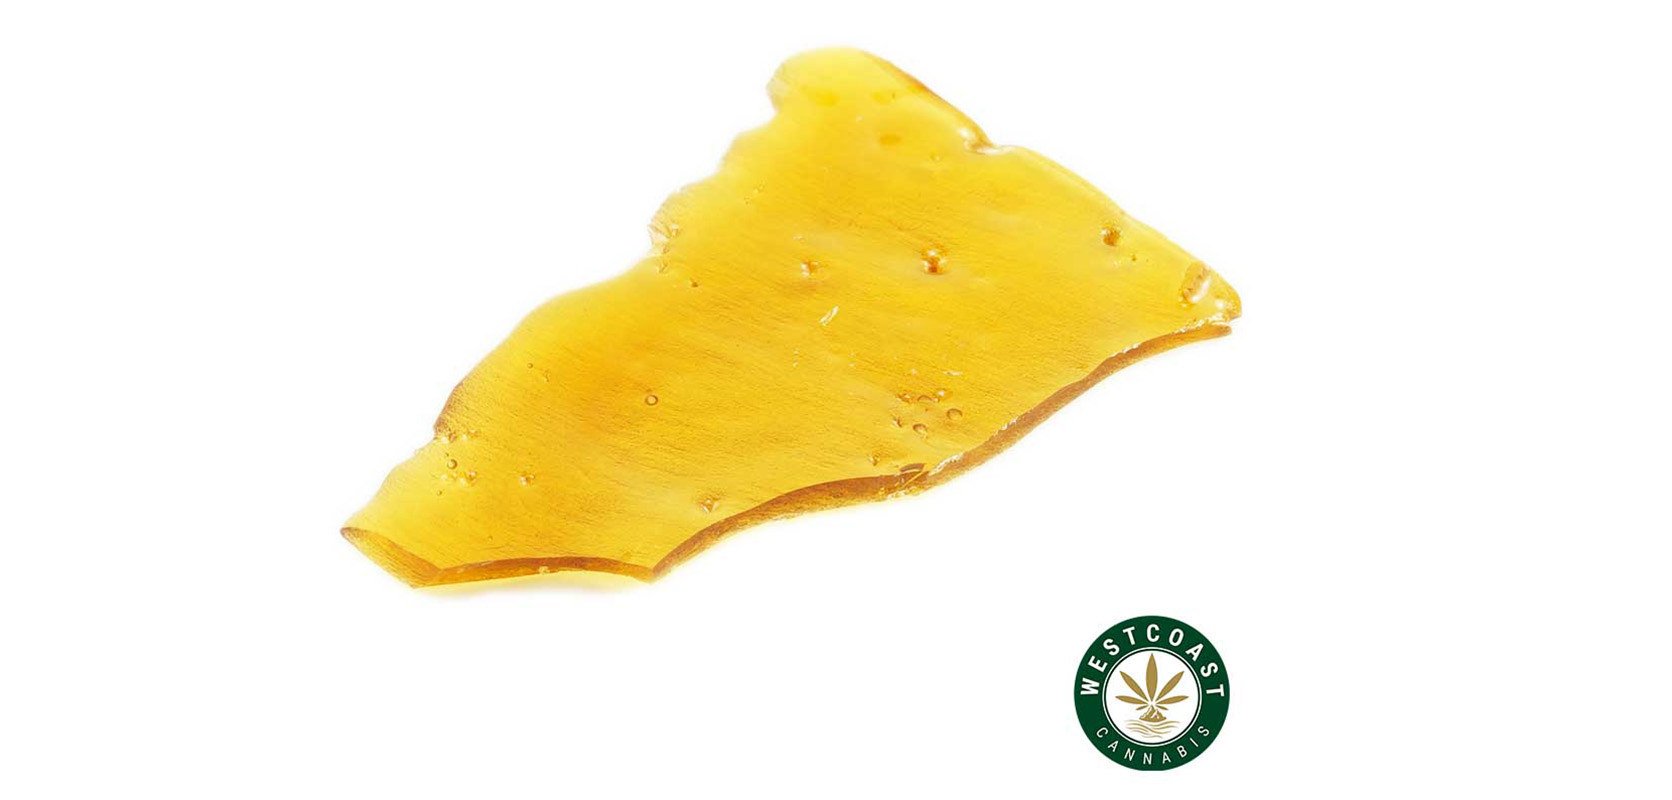 green crack shatter live resin for sale online canada. online dispensary west coast cannabis buy weed online.